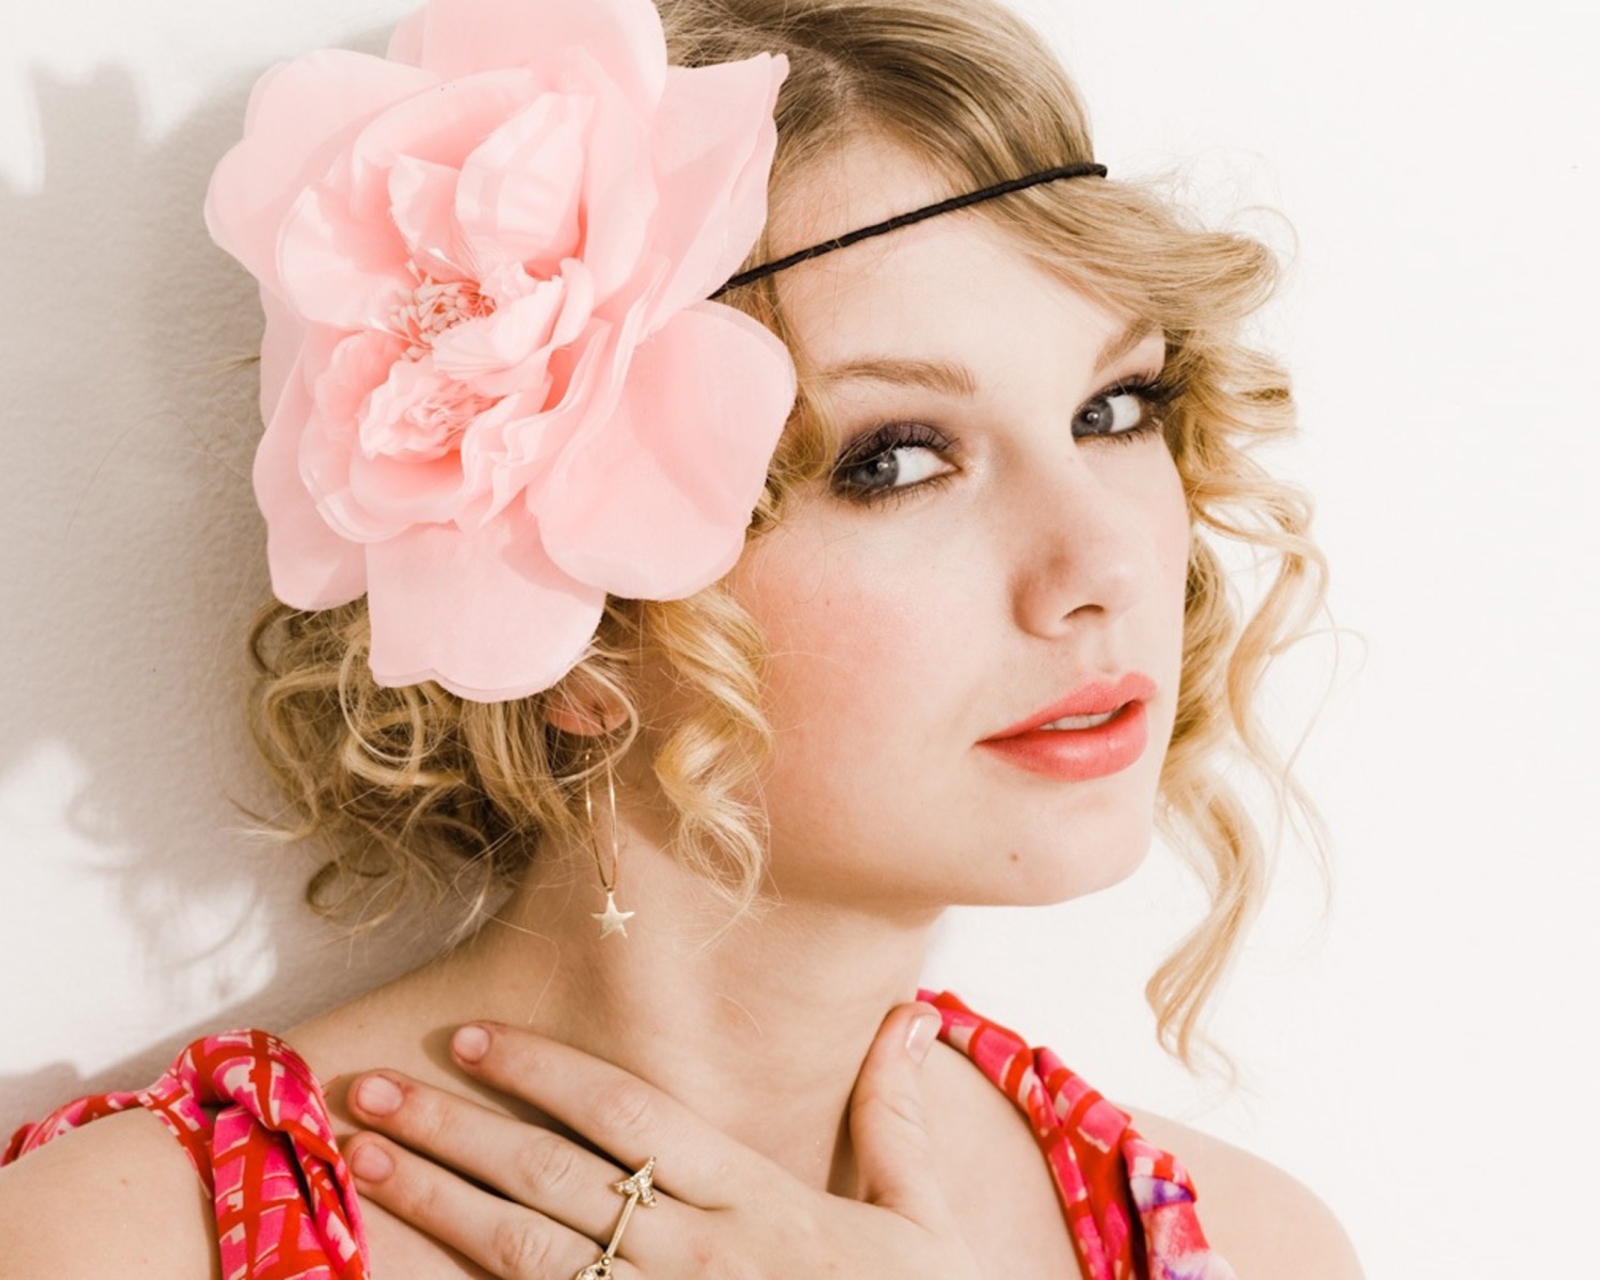 Taylor Swift With Pink Rose On Head wallpaper 1600x1280